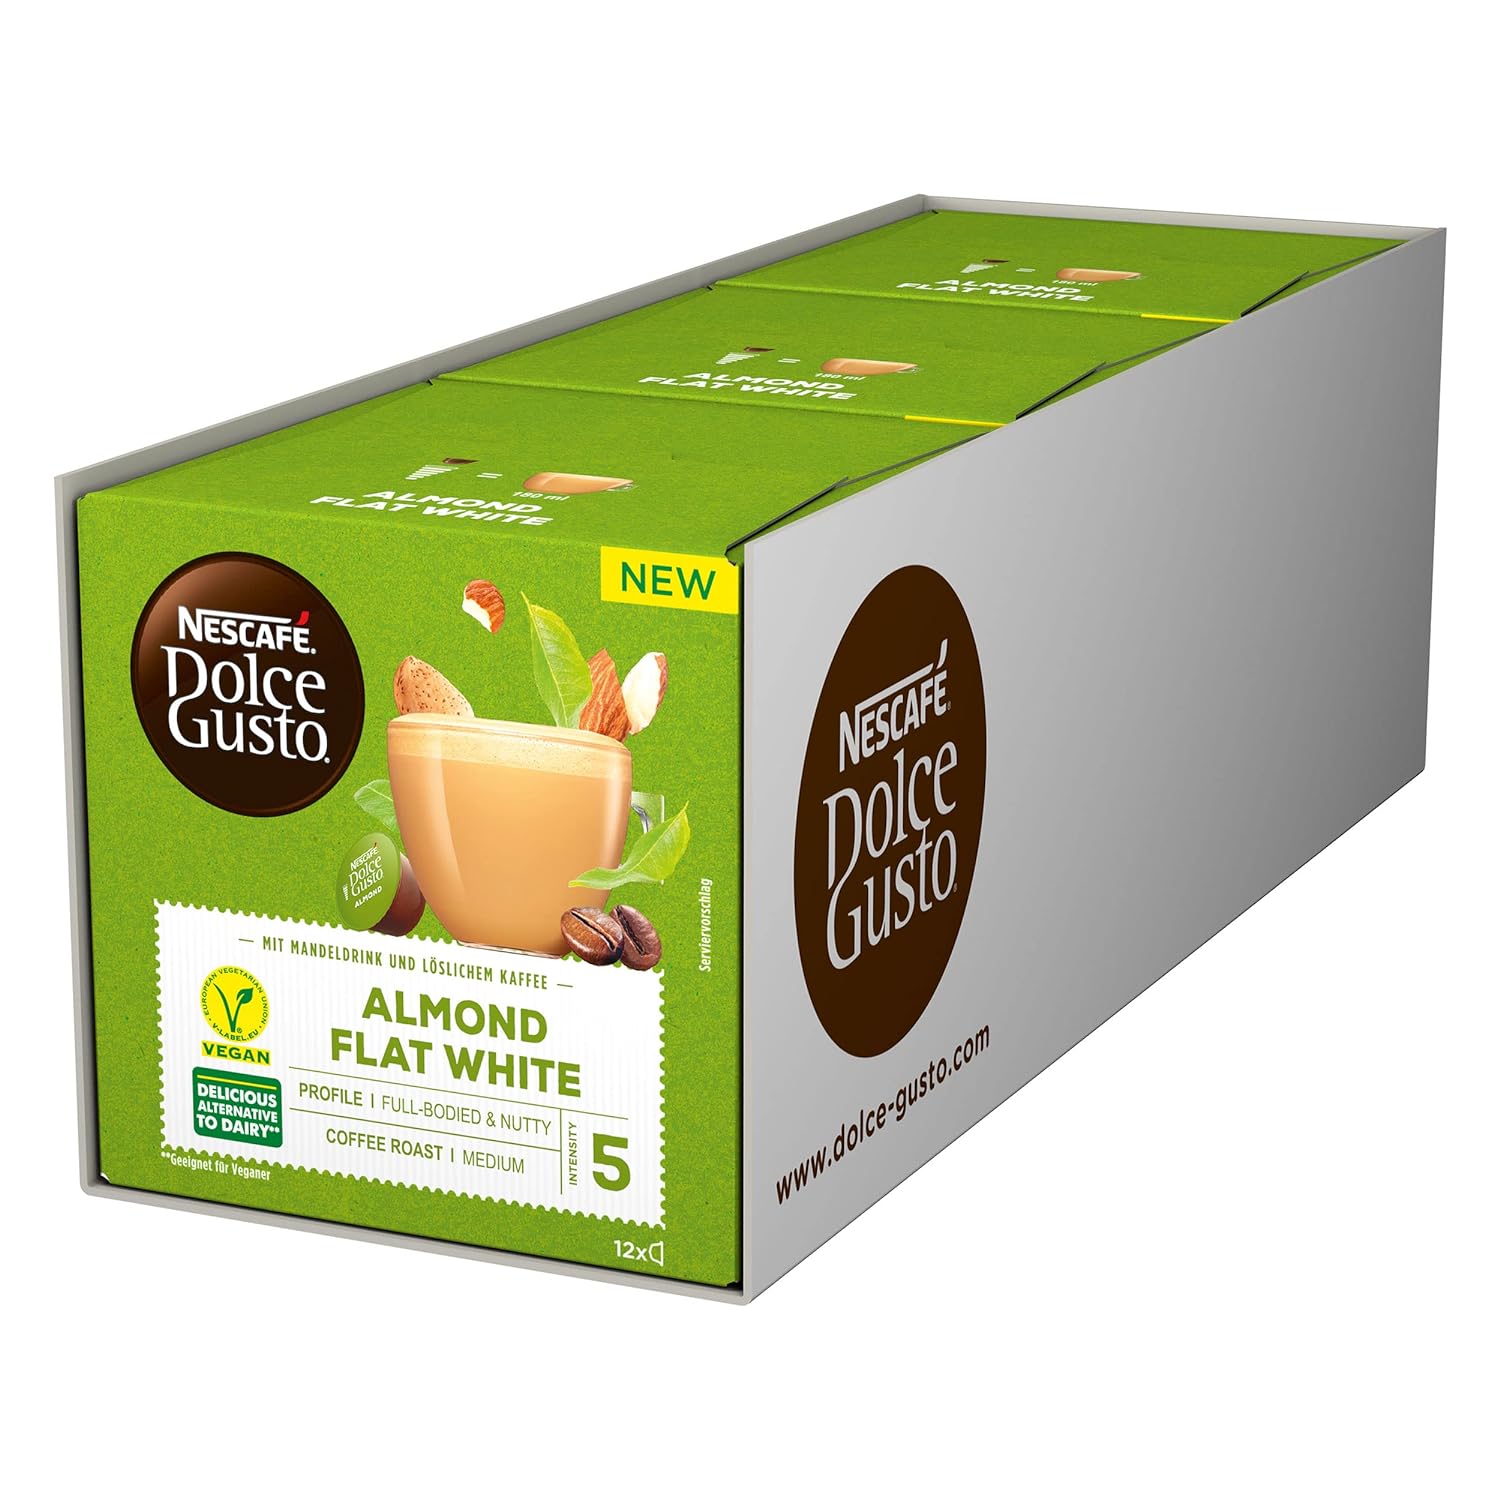 NESCAFÉ Dolce Gusto Almond Flat White, 36 Coffee Capsules (Vegan, with Almond Drink), Pack of 3 (3 x 12 Capsules)